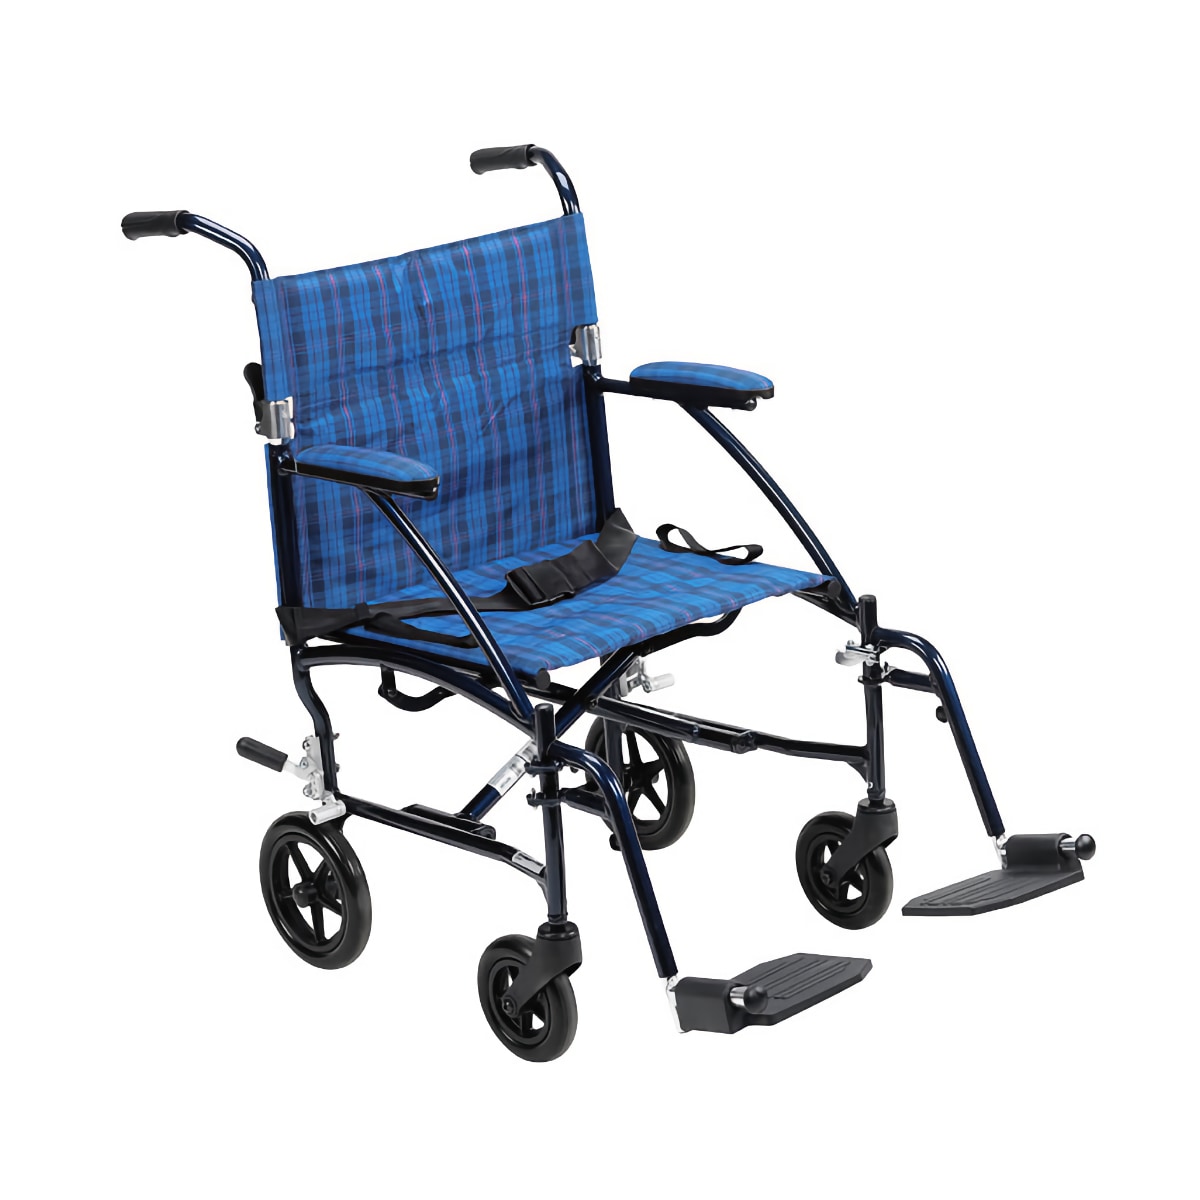 Fly-Lite transport chair in blue plaid